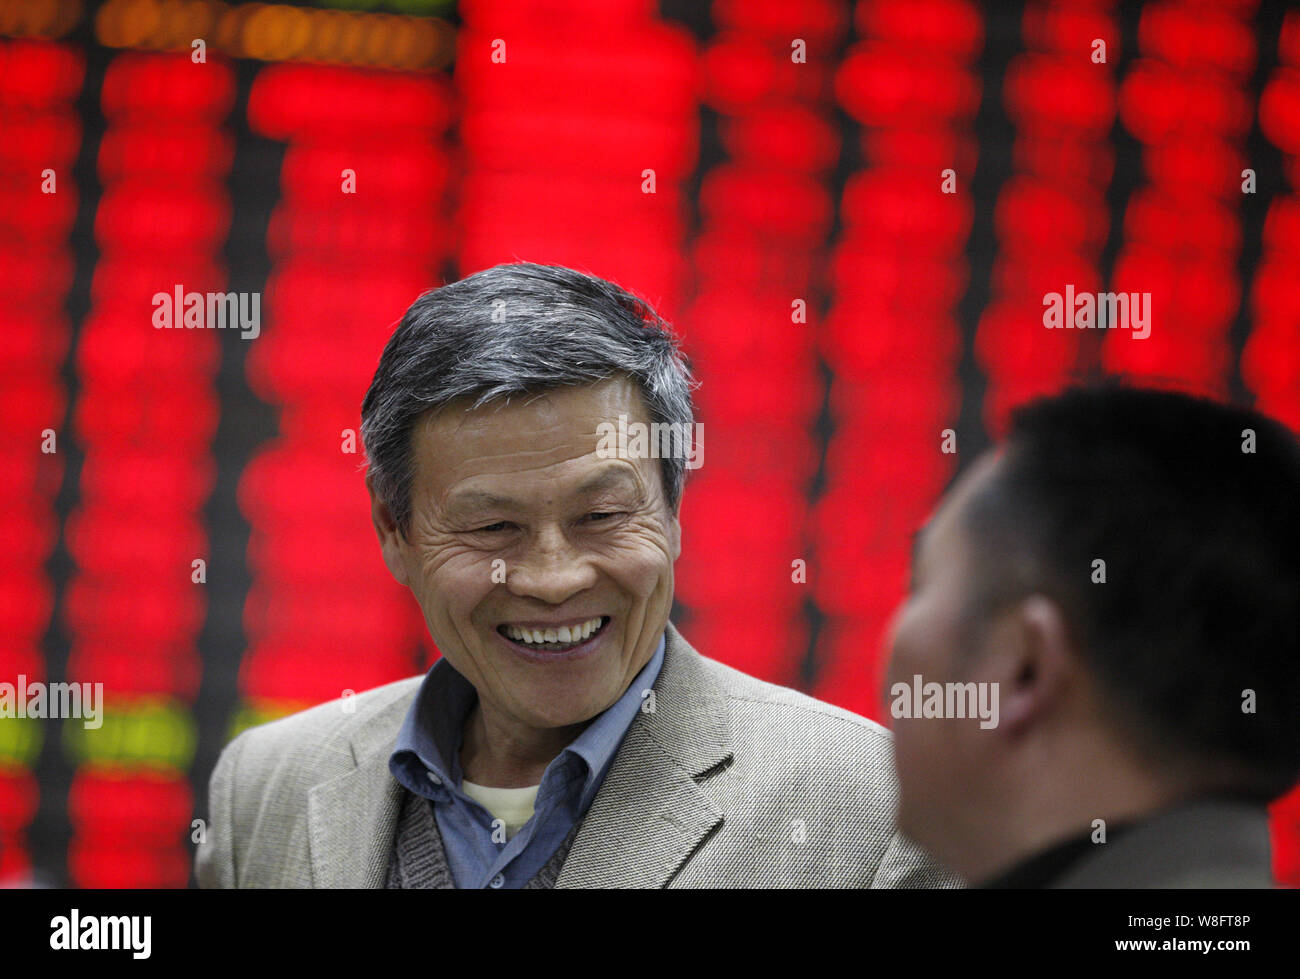 A Chinese investor smiles and talks to another in front of a display showing prices of shares (red for price rising and green for price falling) at a Stock Photo